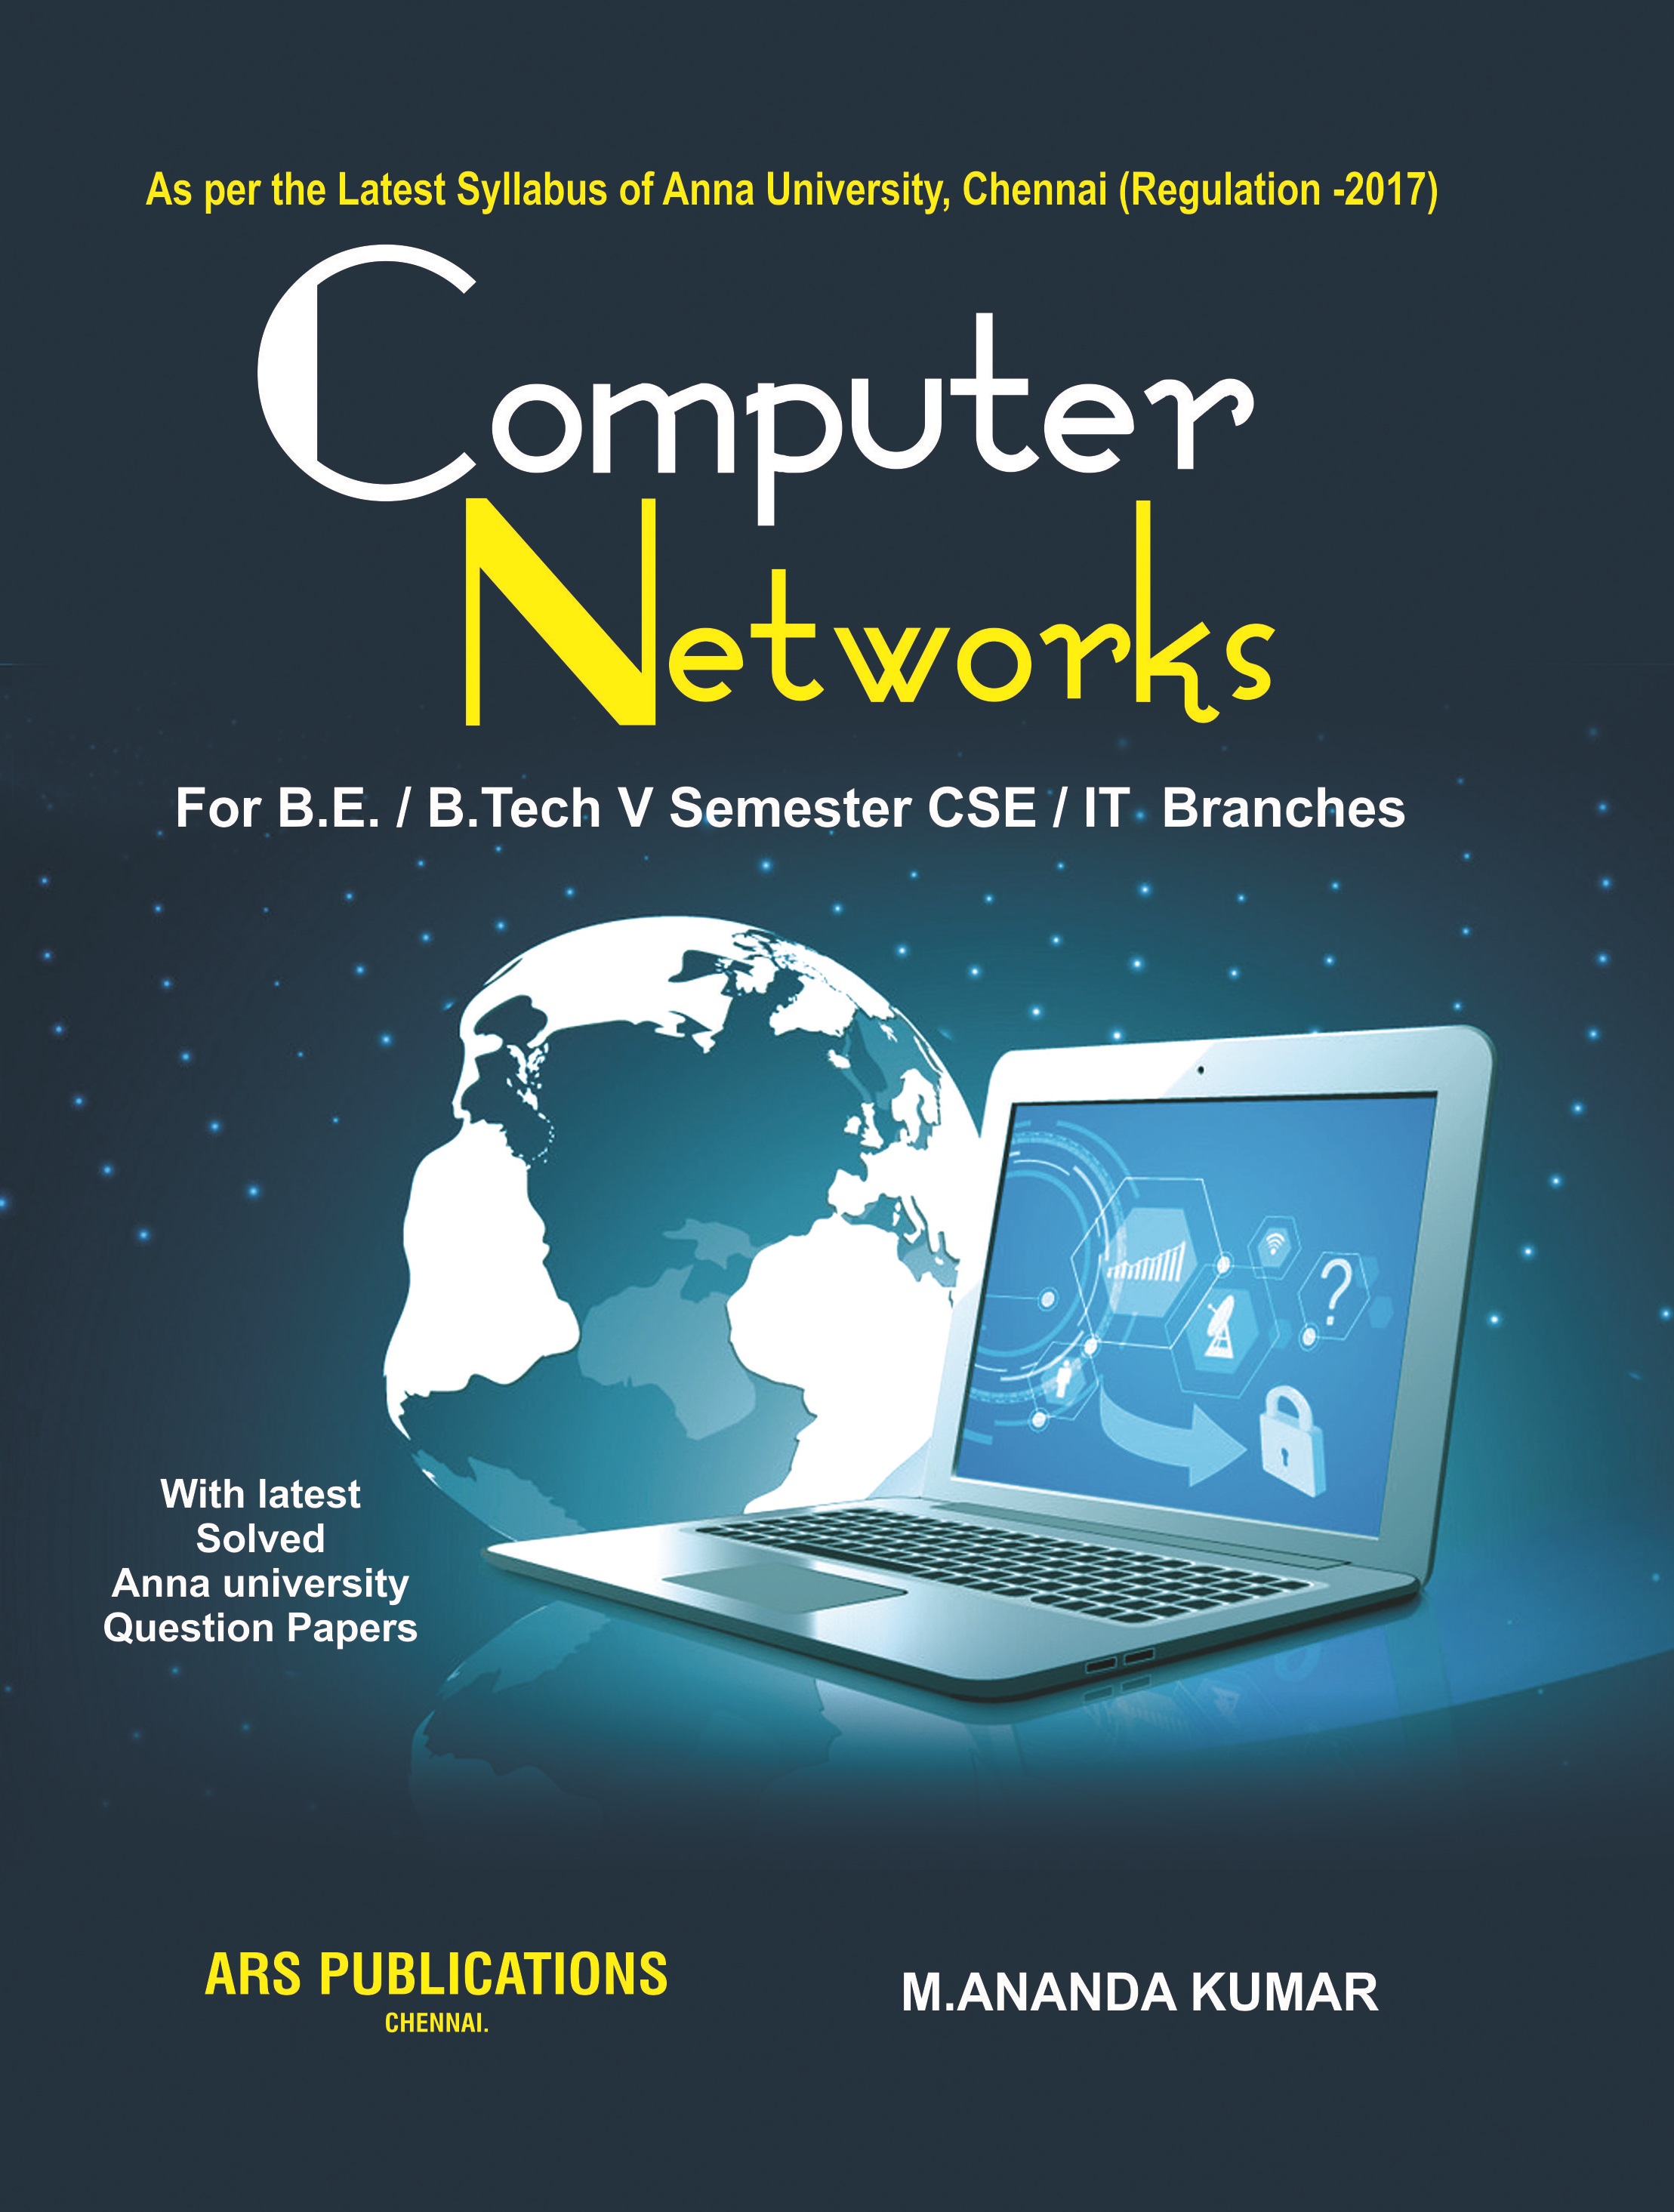 computer network research articles